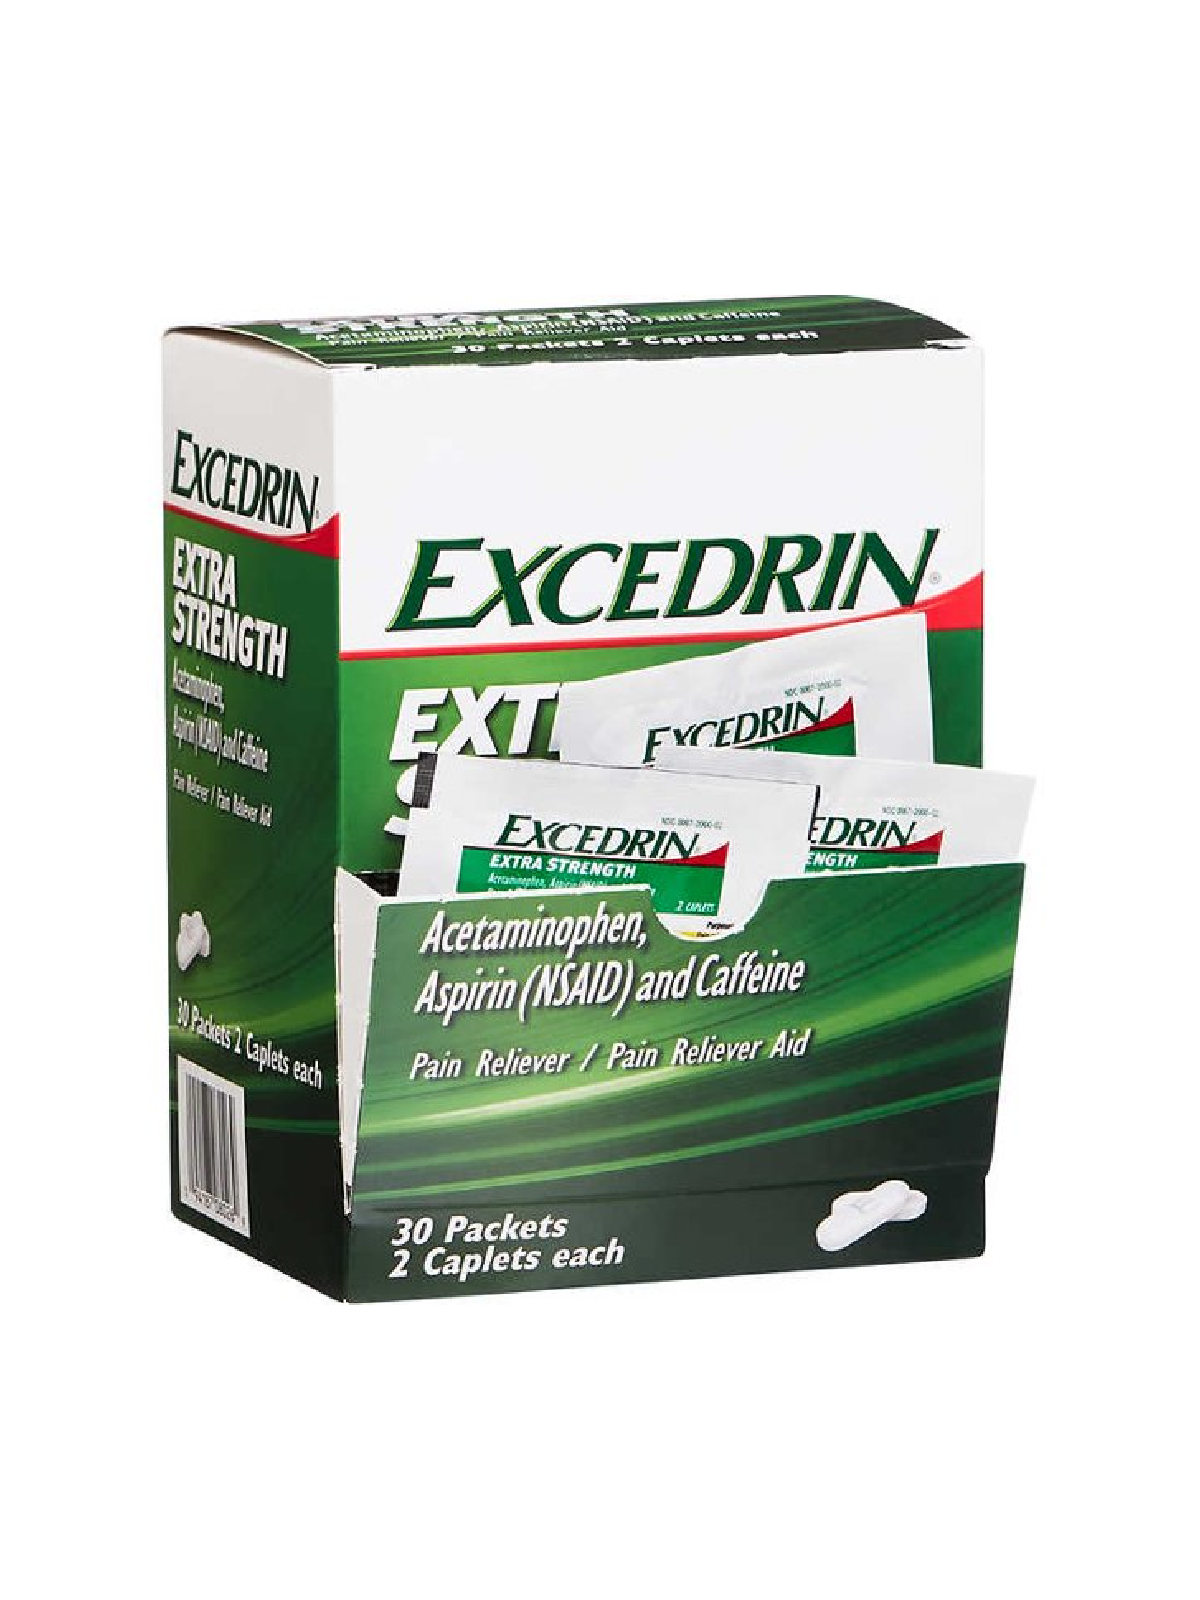 EXCEDRIN EXTRA STRENGTH 30 PACKETS 2 CAPLETS EA